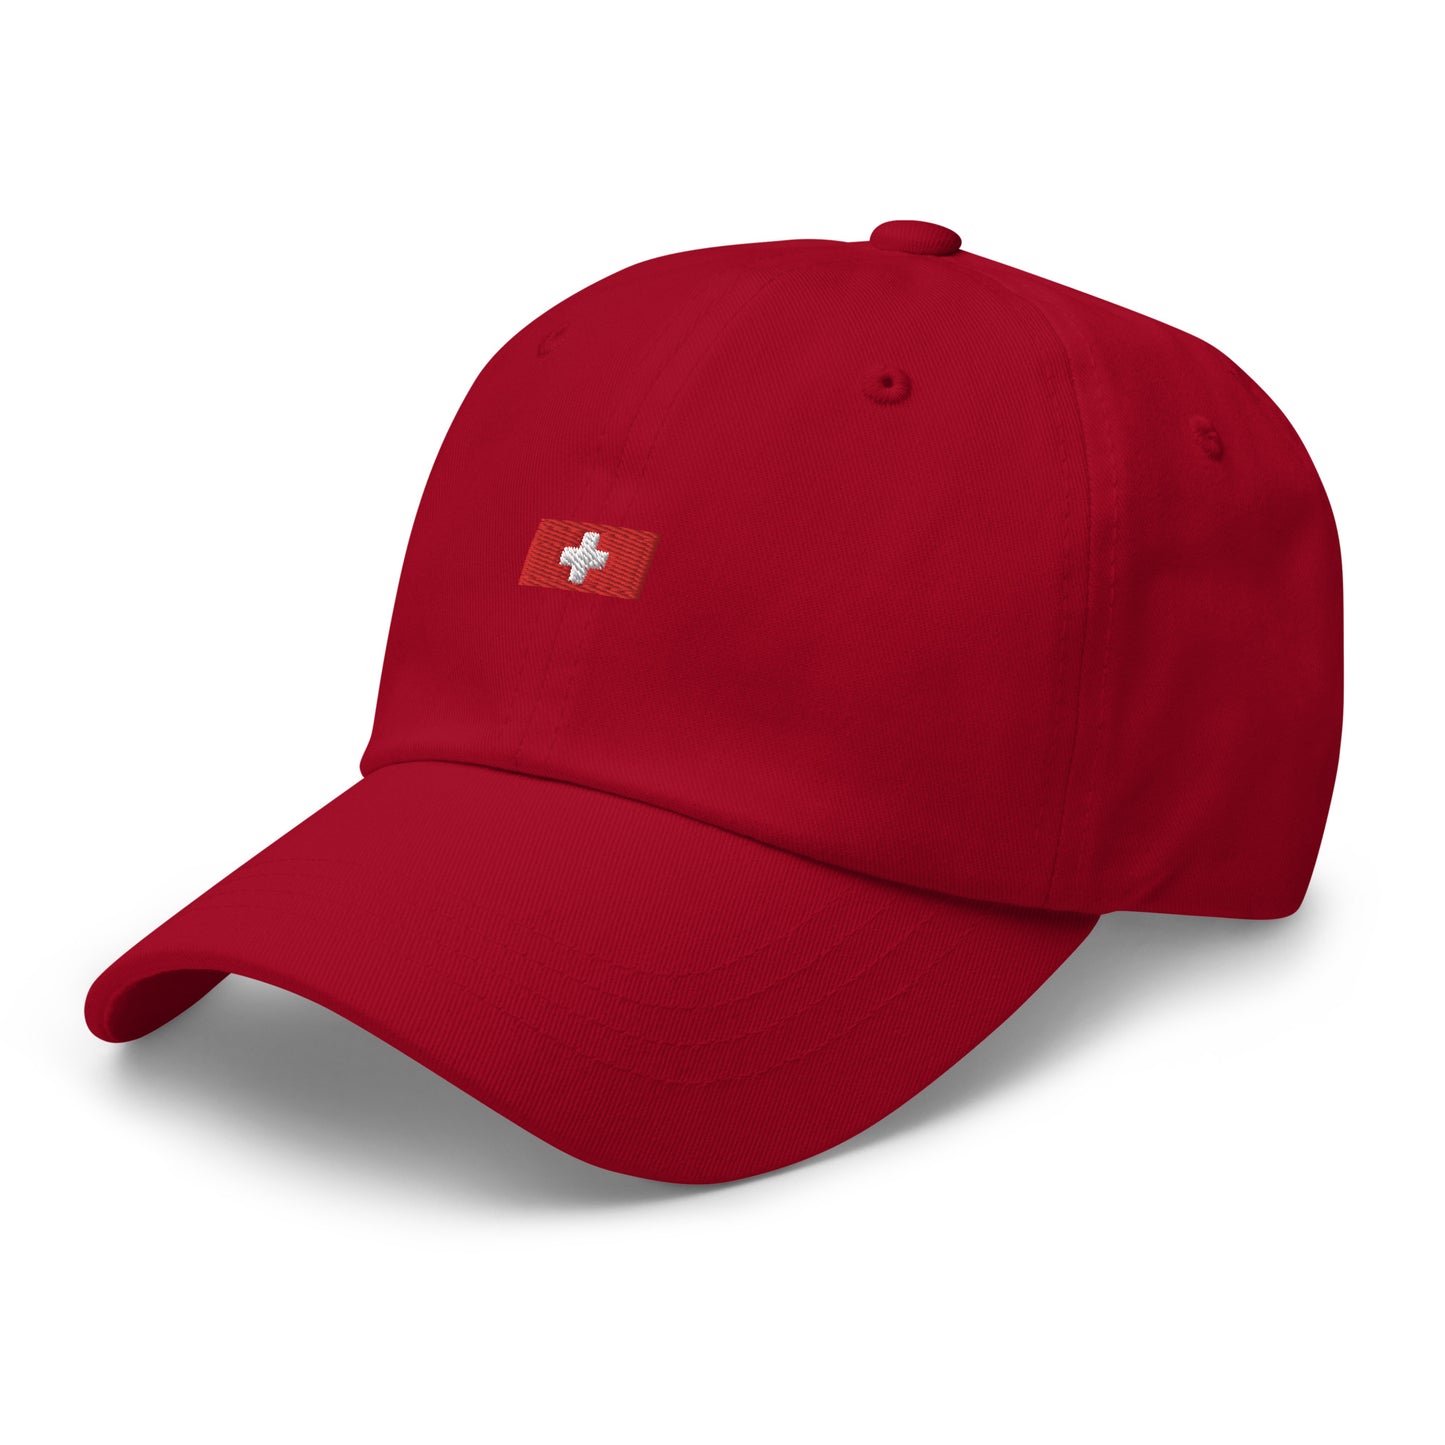 cap-from-the-front-with-swiss-flag